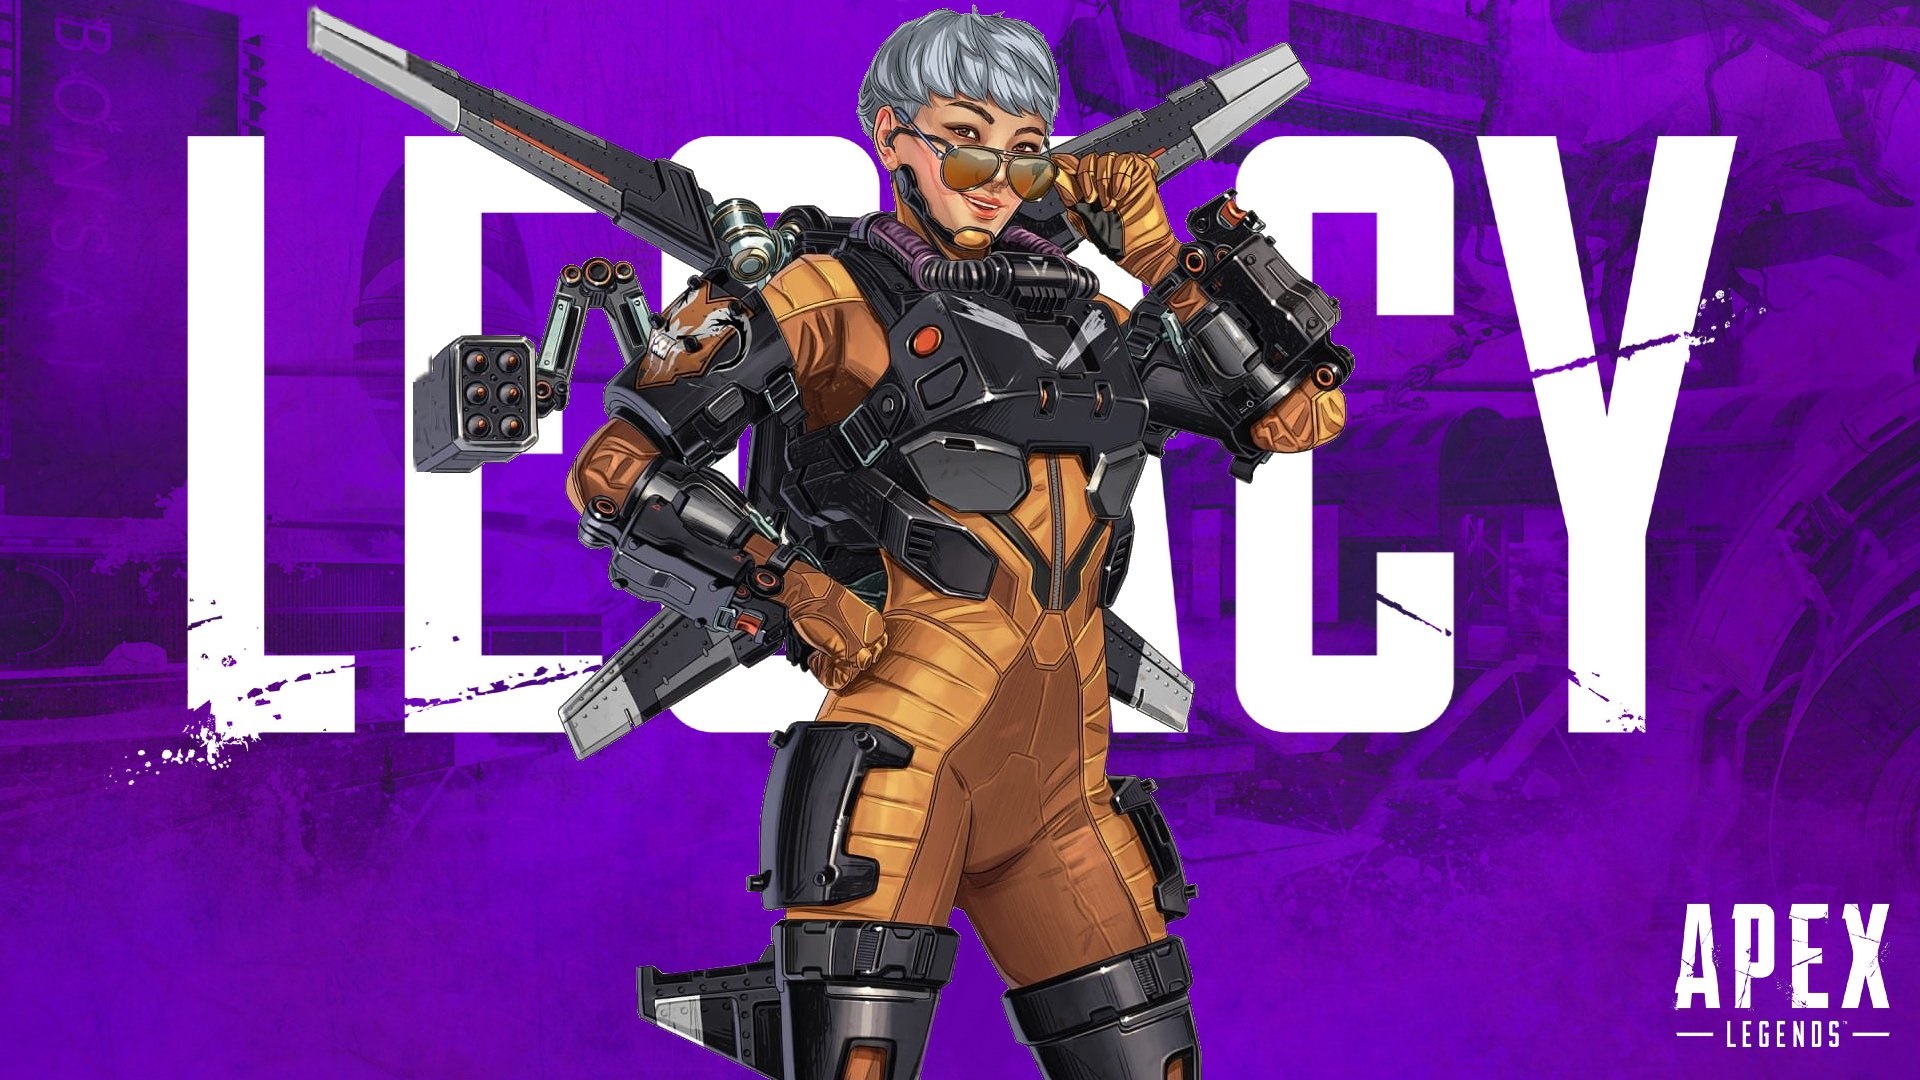 Apex Legends Season 9 Legacy Is Now Live With 1.67 Patch Notes